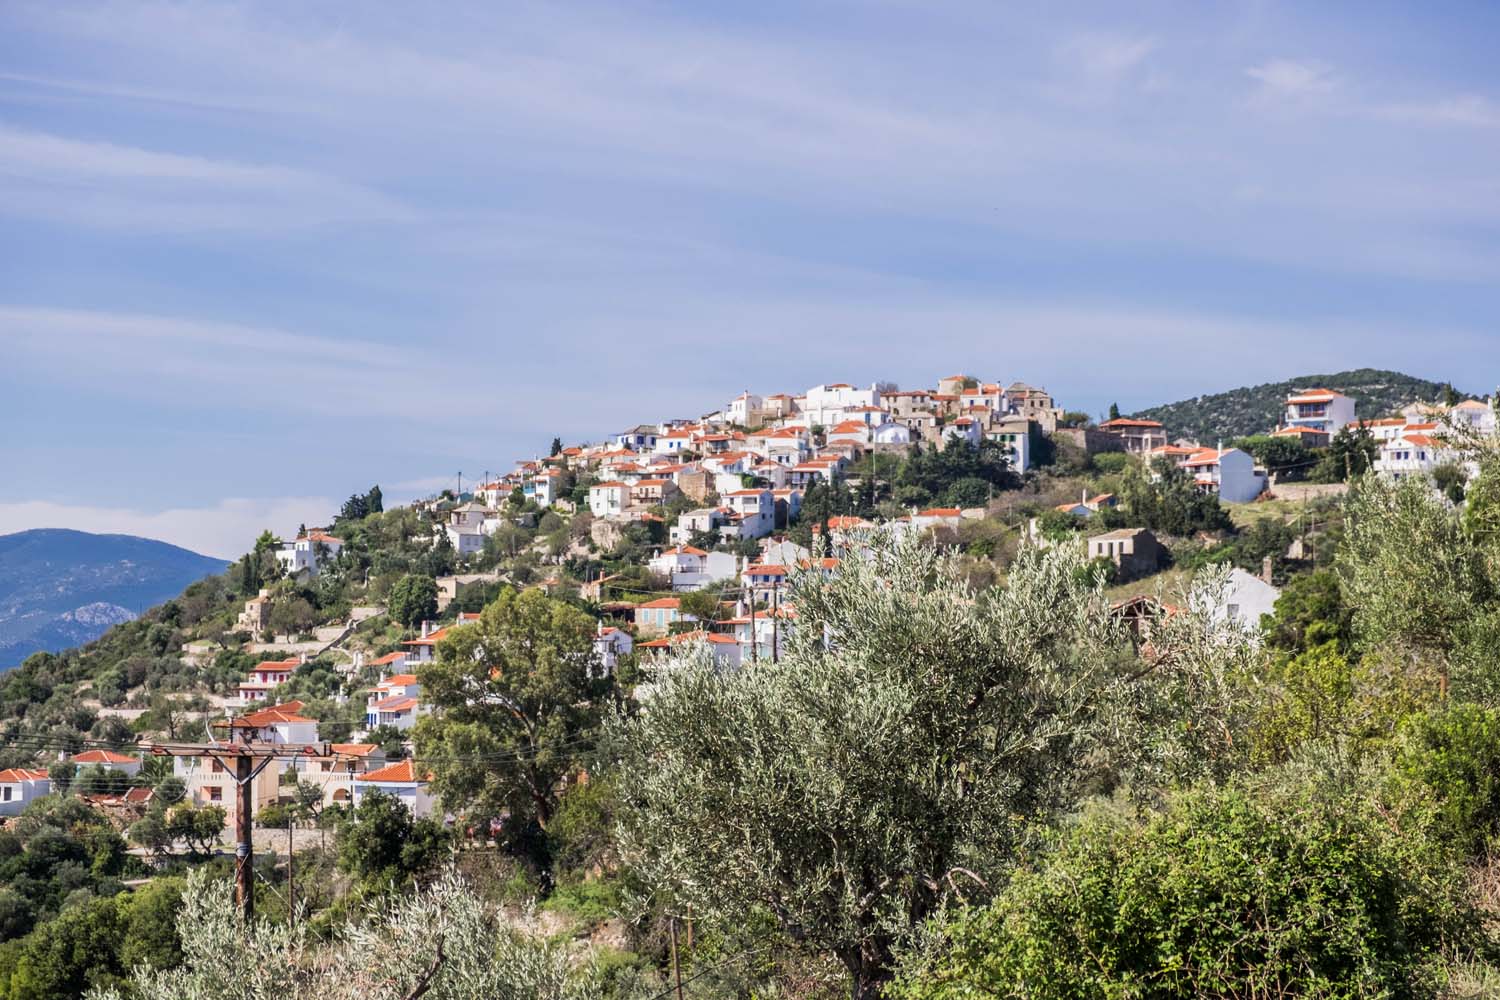 View of Alonissos Old Town on a hill with green bushes